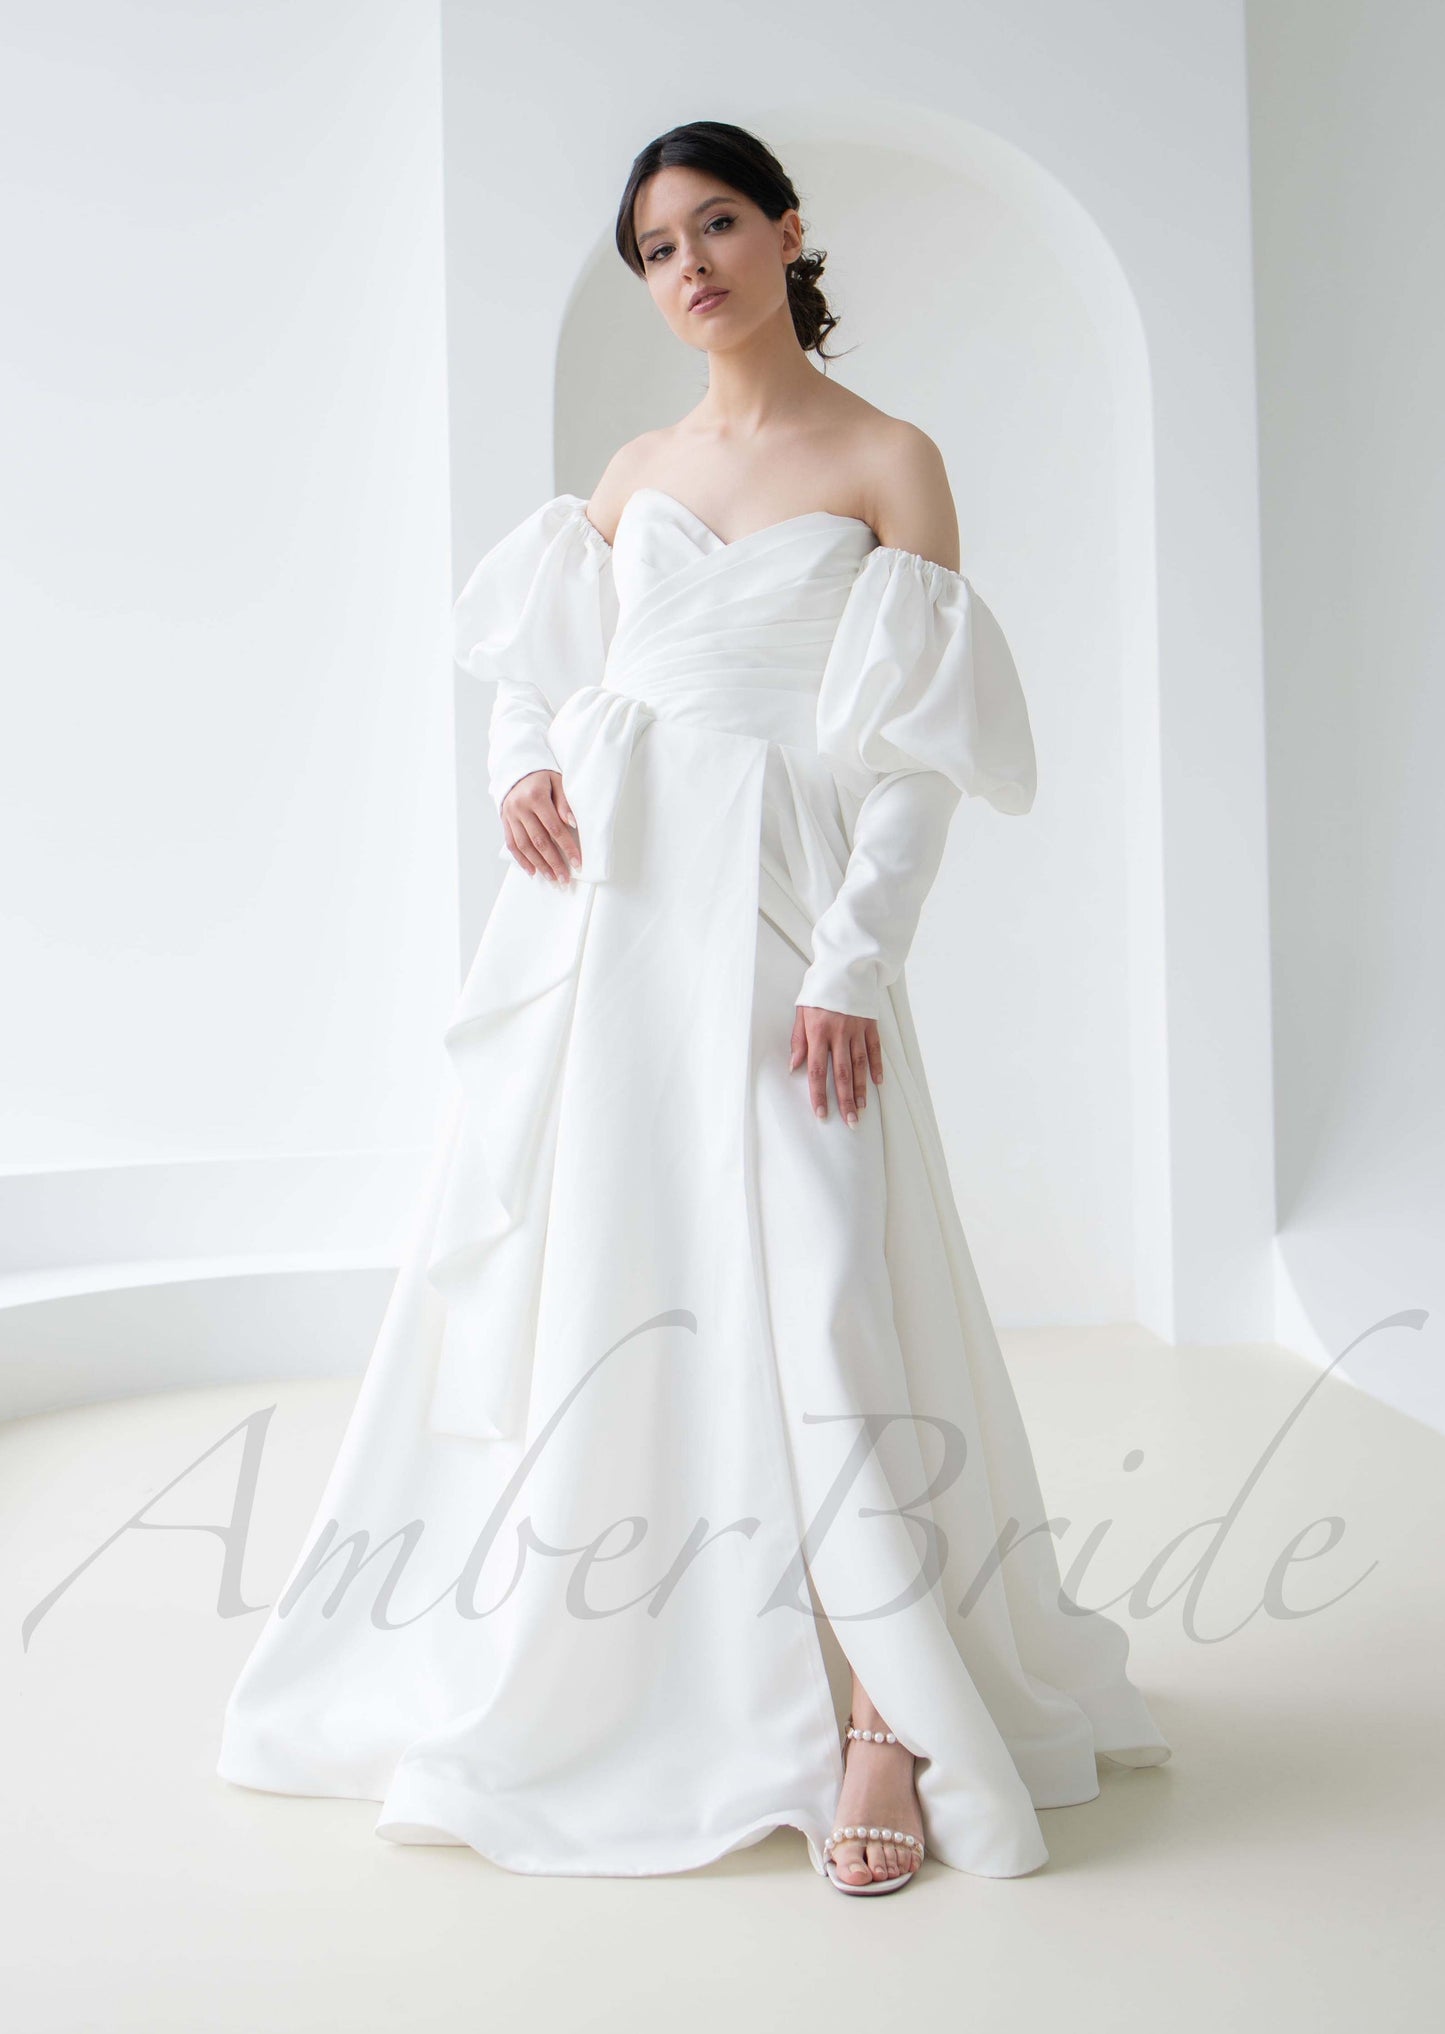 STOCK SELL-OUT: Strapless A Line Satin Wedding Dress with Bishop Sleeves